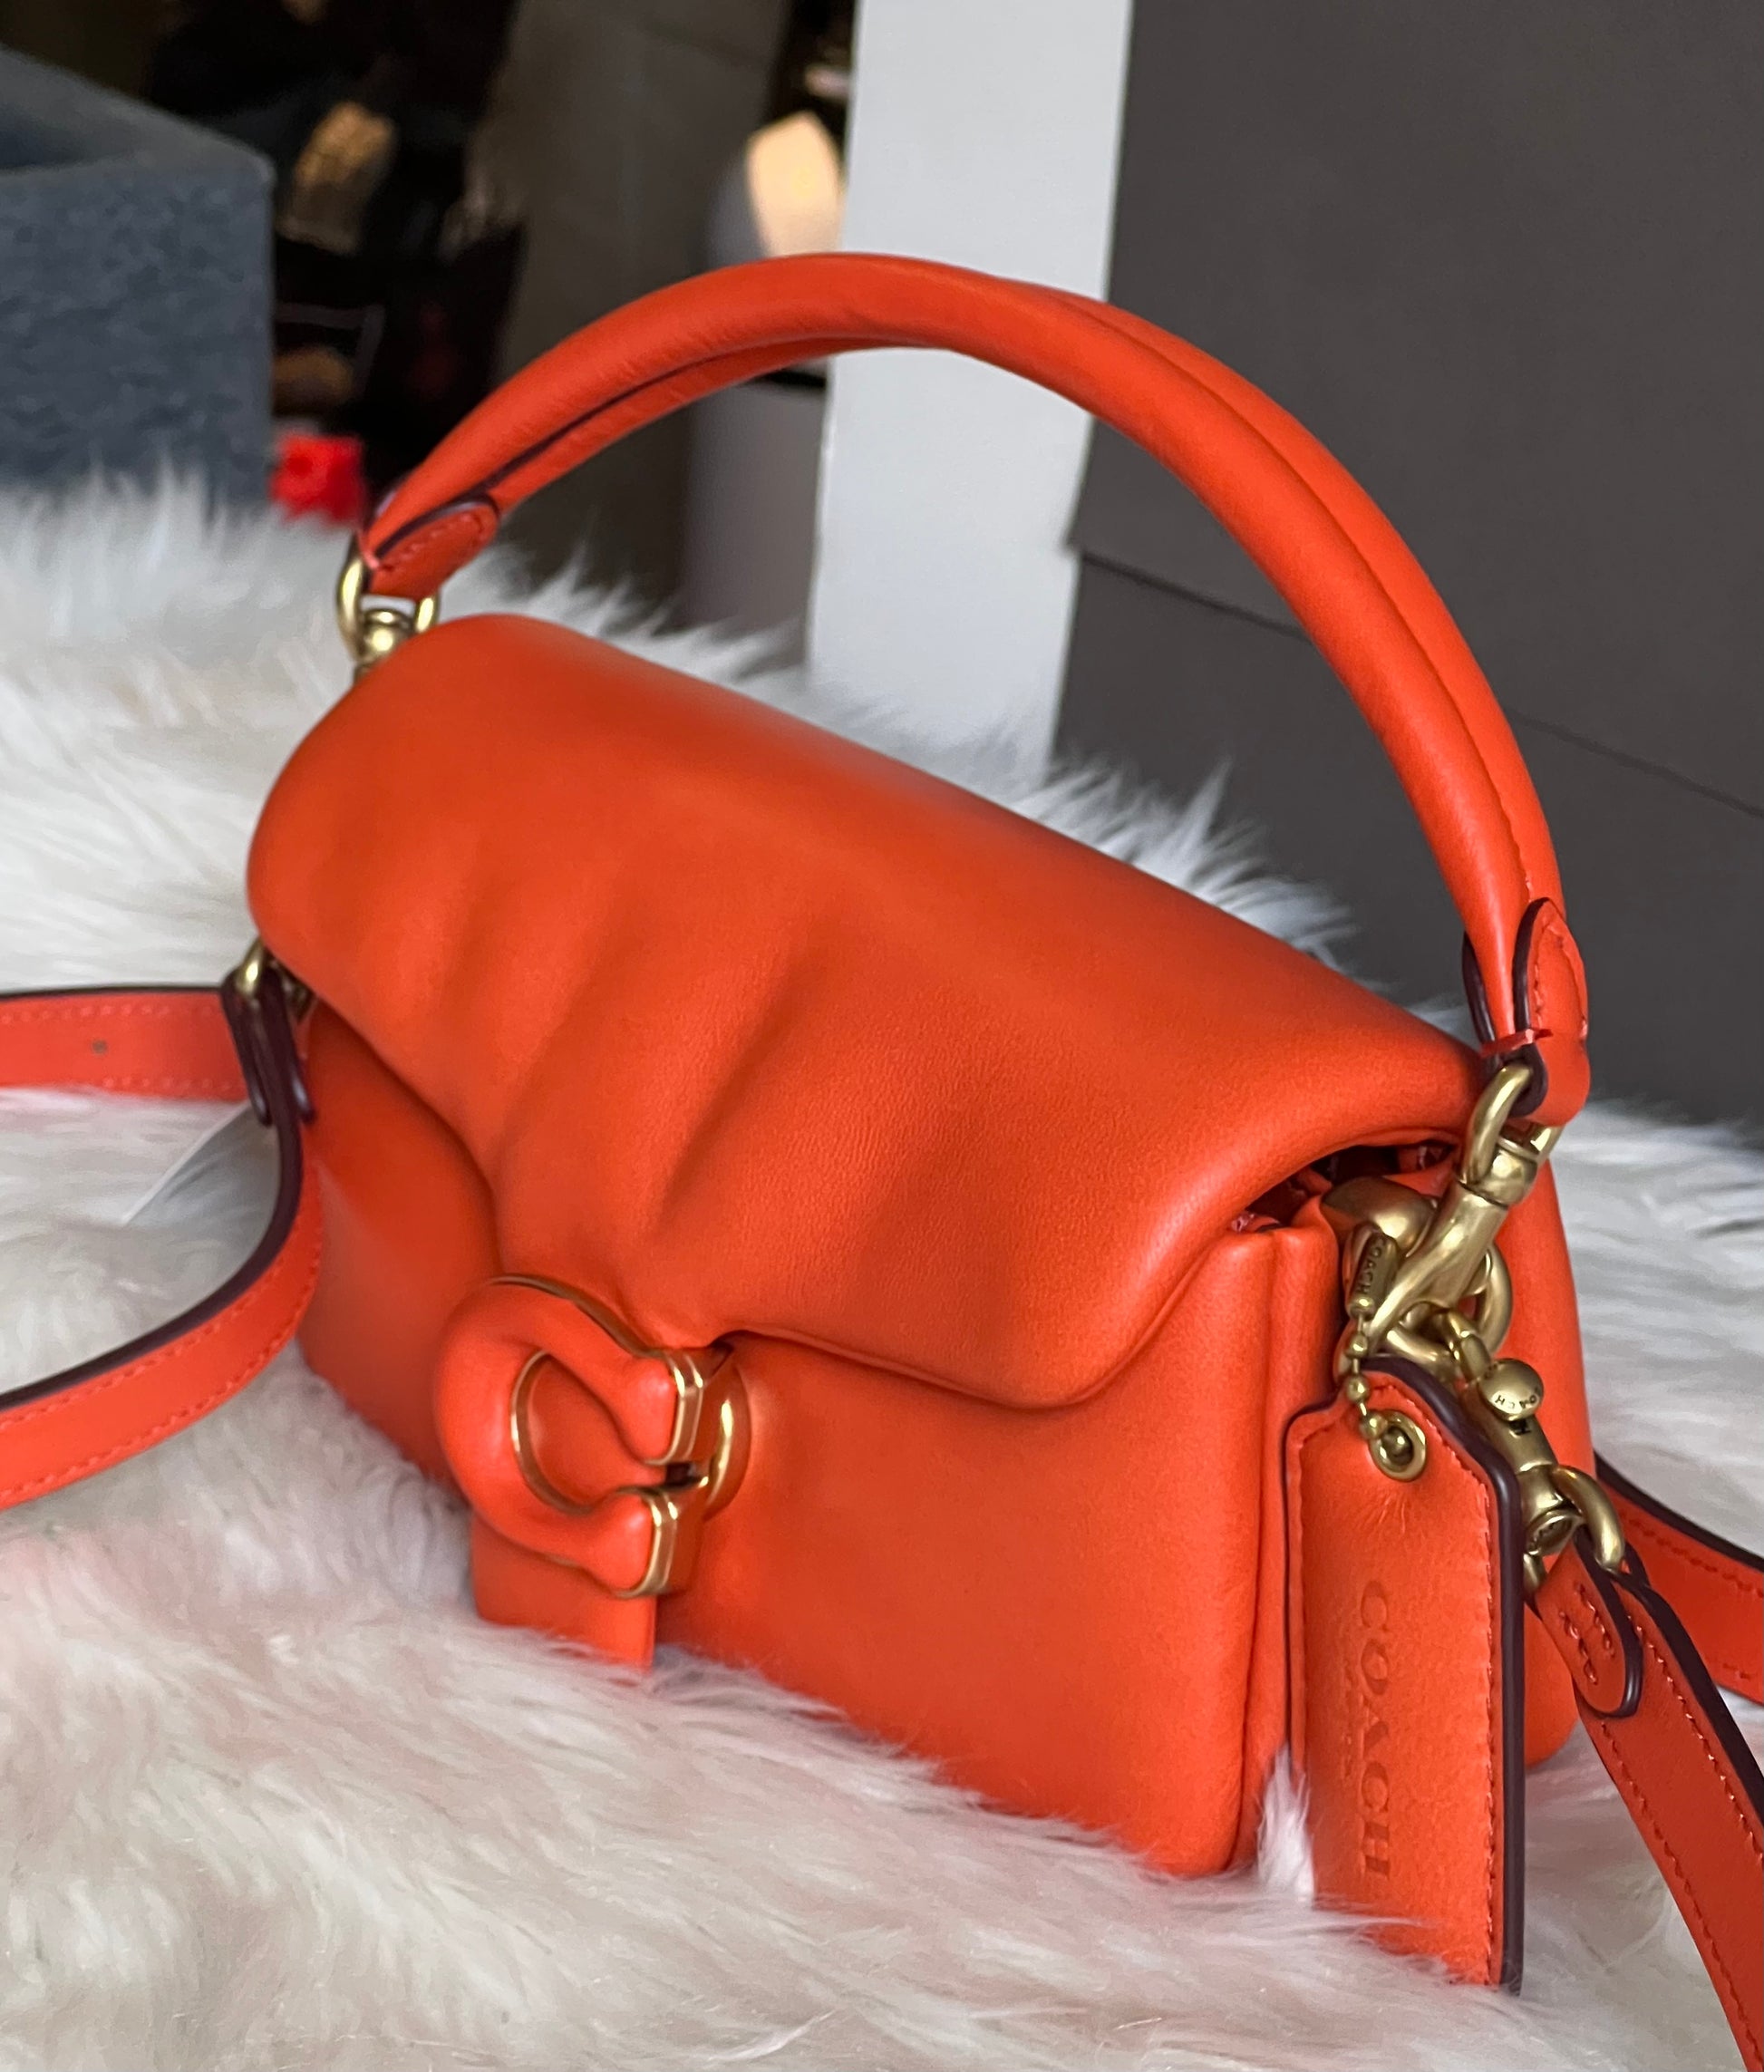 COACH Tabby Pillow Leather Shoulder Bag in Orange